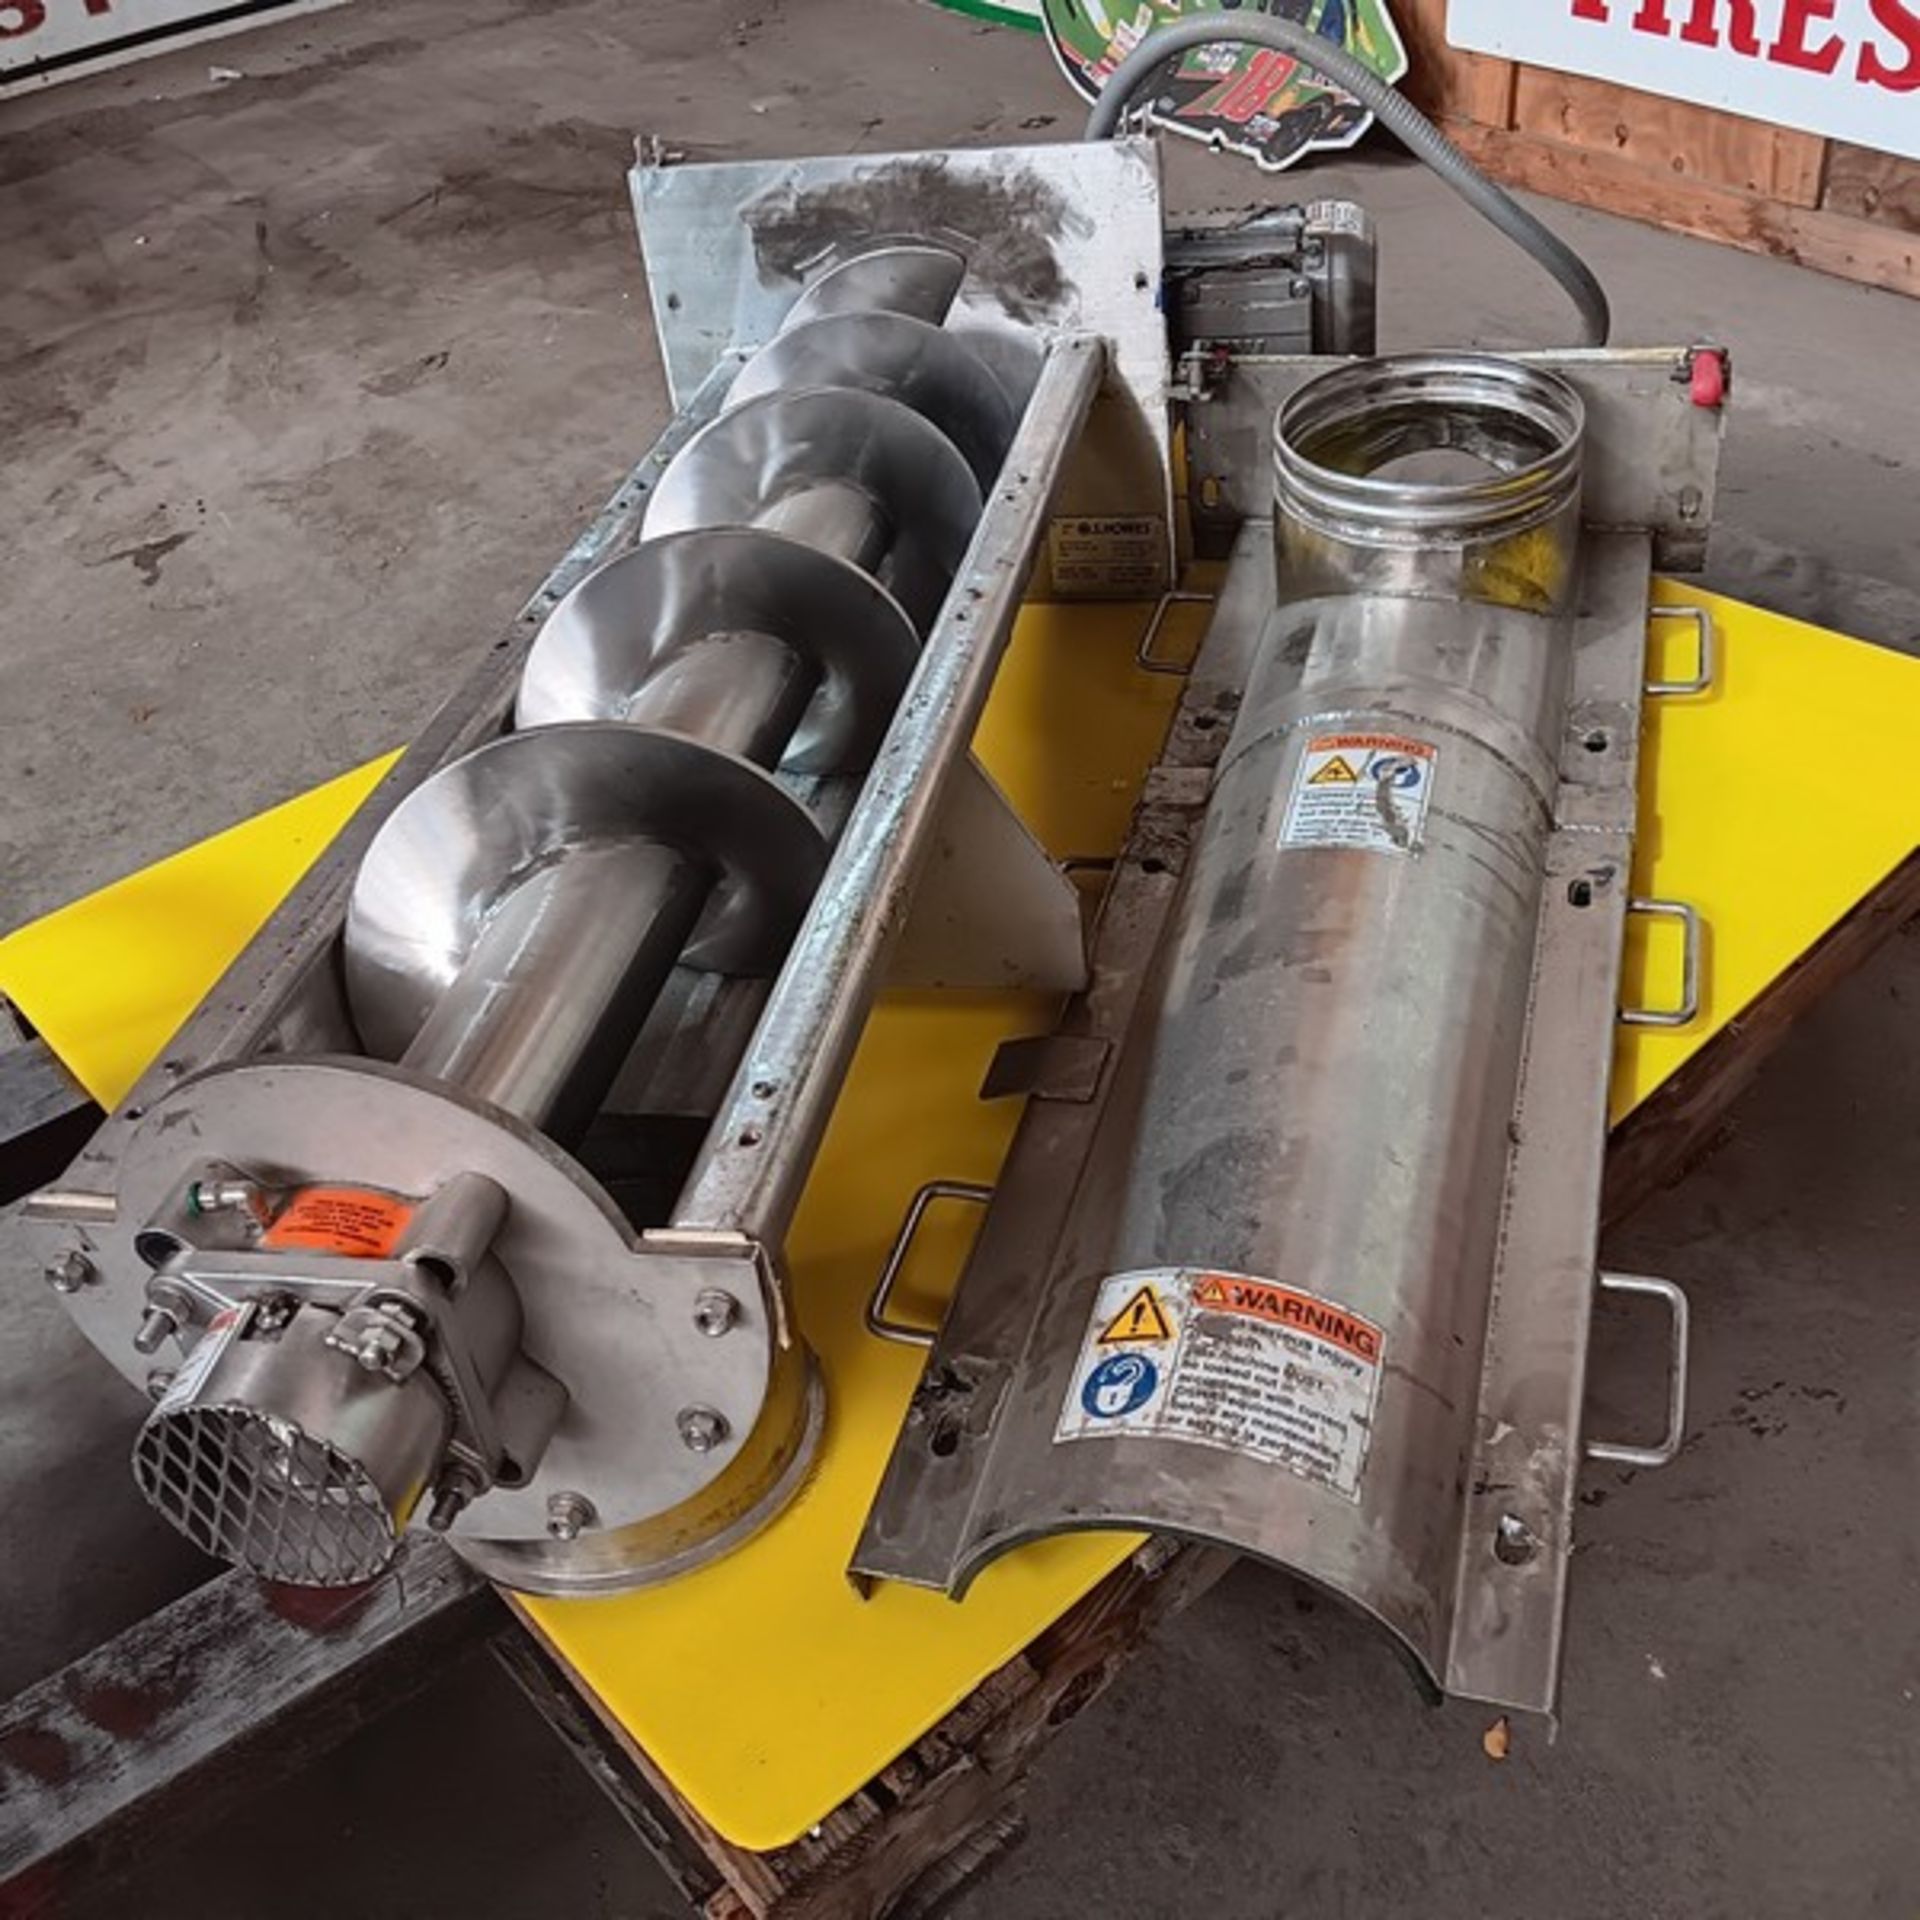 Showes 9" S/S Auger, Model 9SC5, S/N B7881, Yr. 2018 (Loading Fee $500) (Located Fort Worth, TX)